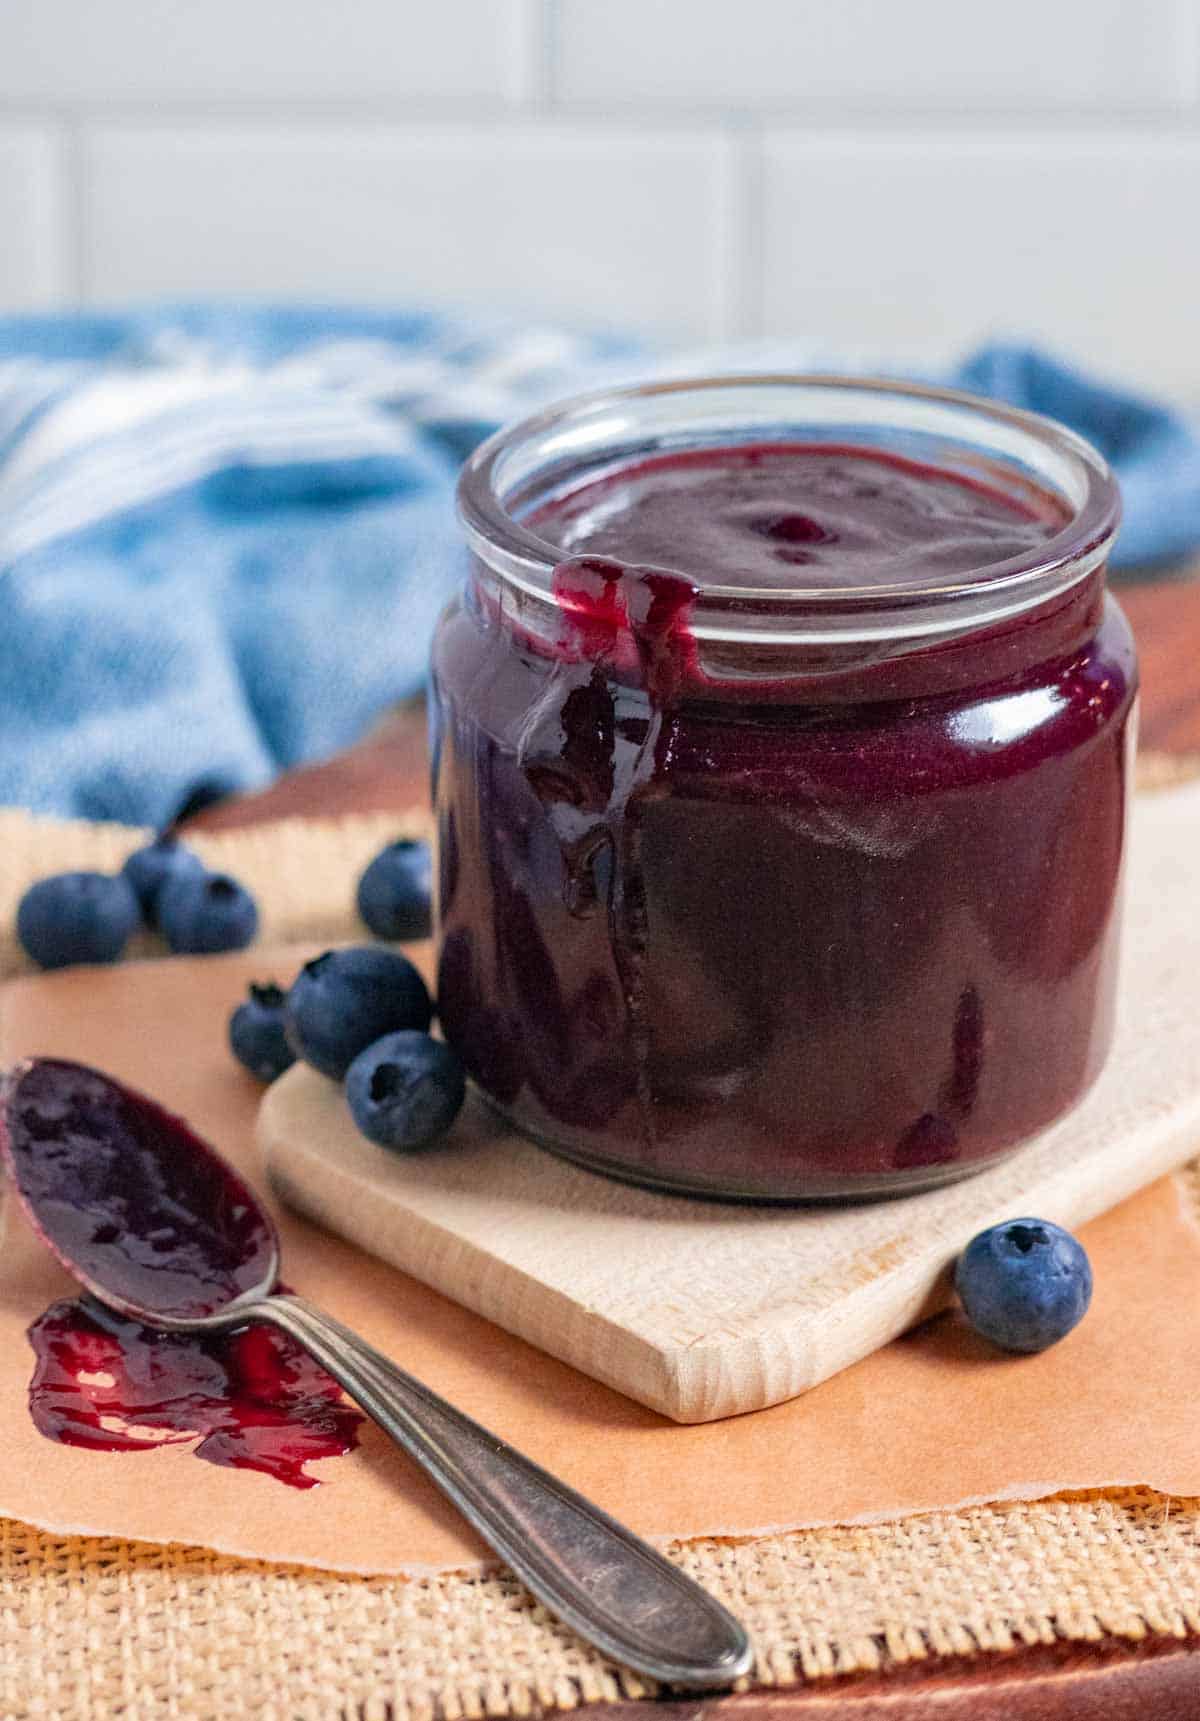 Glass jar of blueberry bbq sauce with dribble down its side on a board with blueberries and a sauced up spoon.